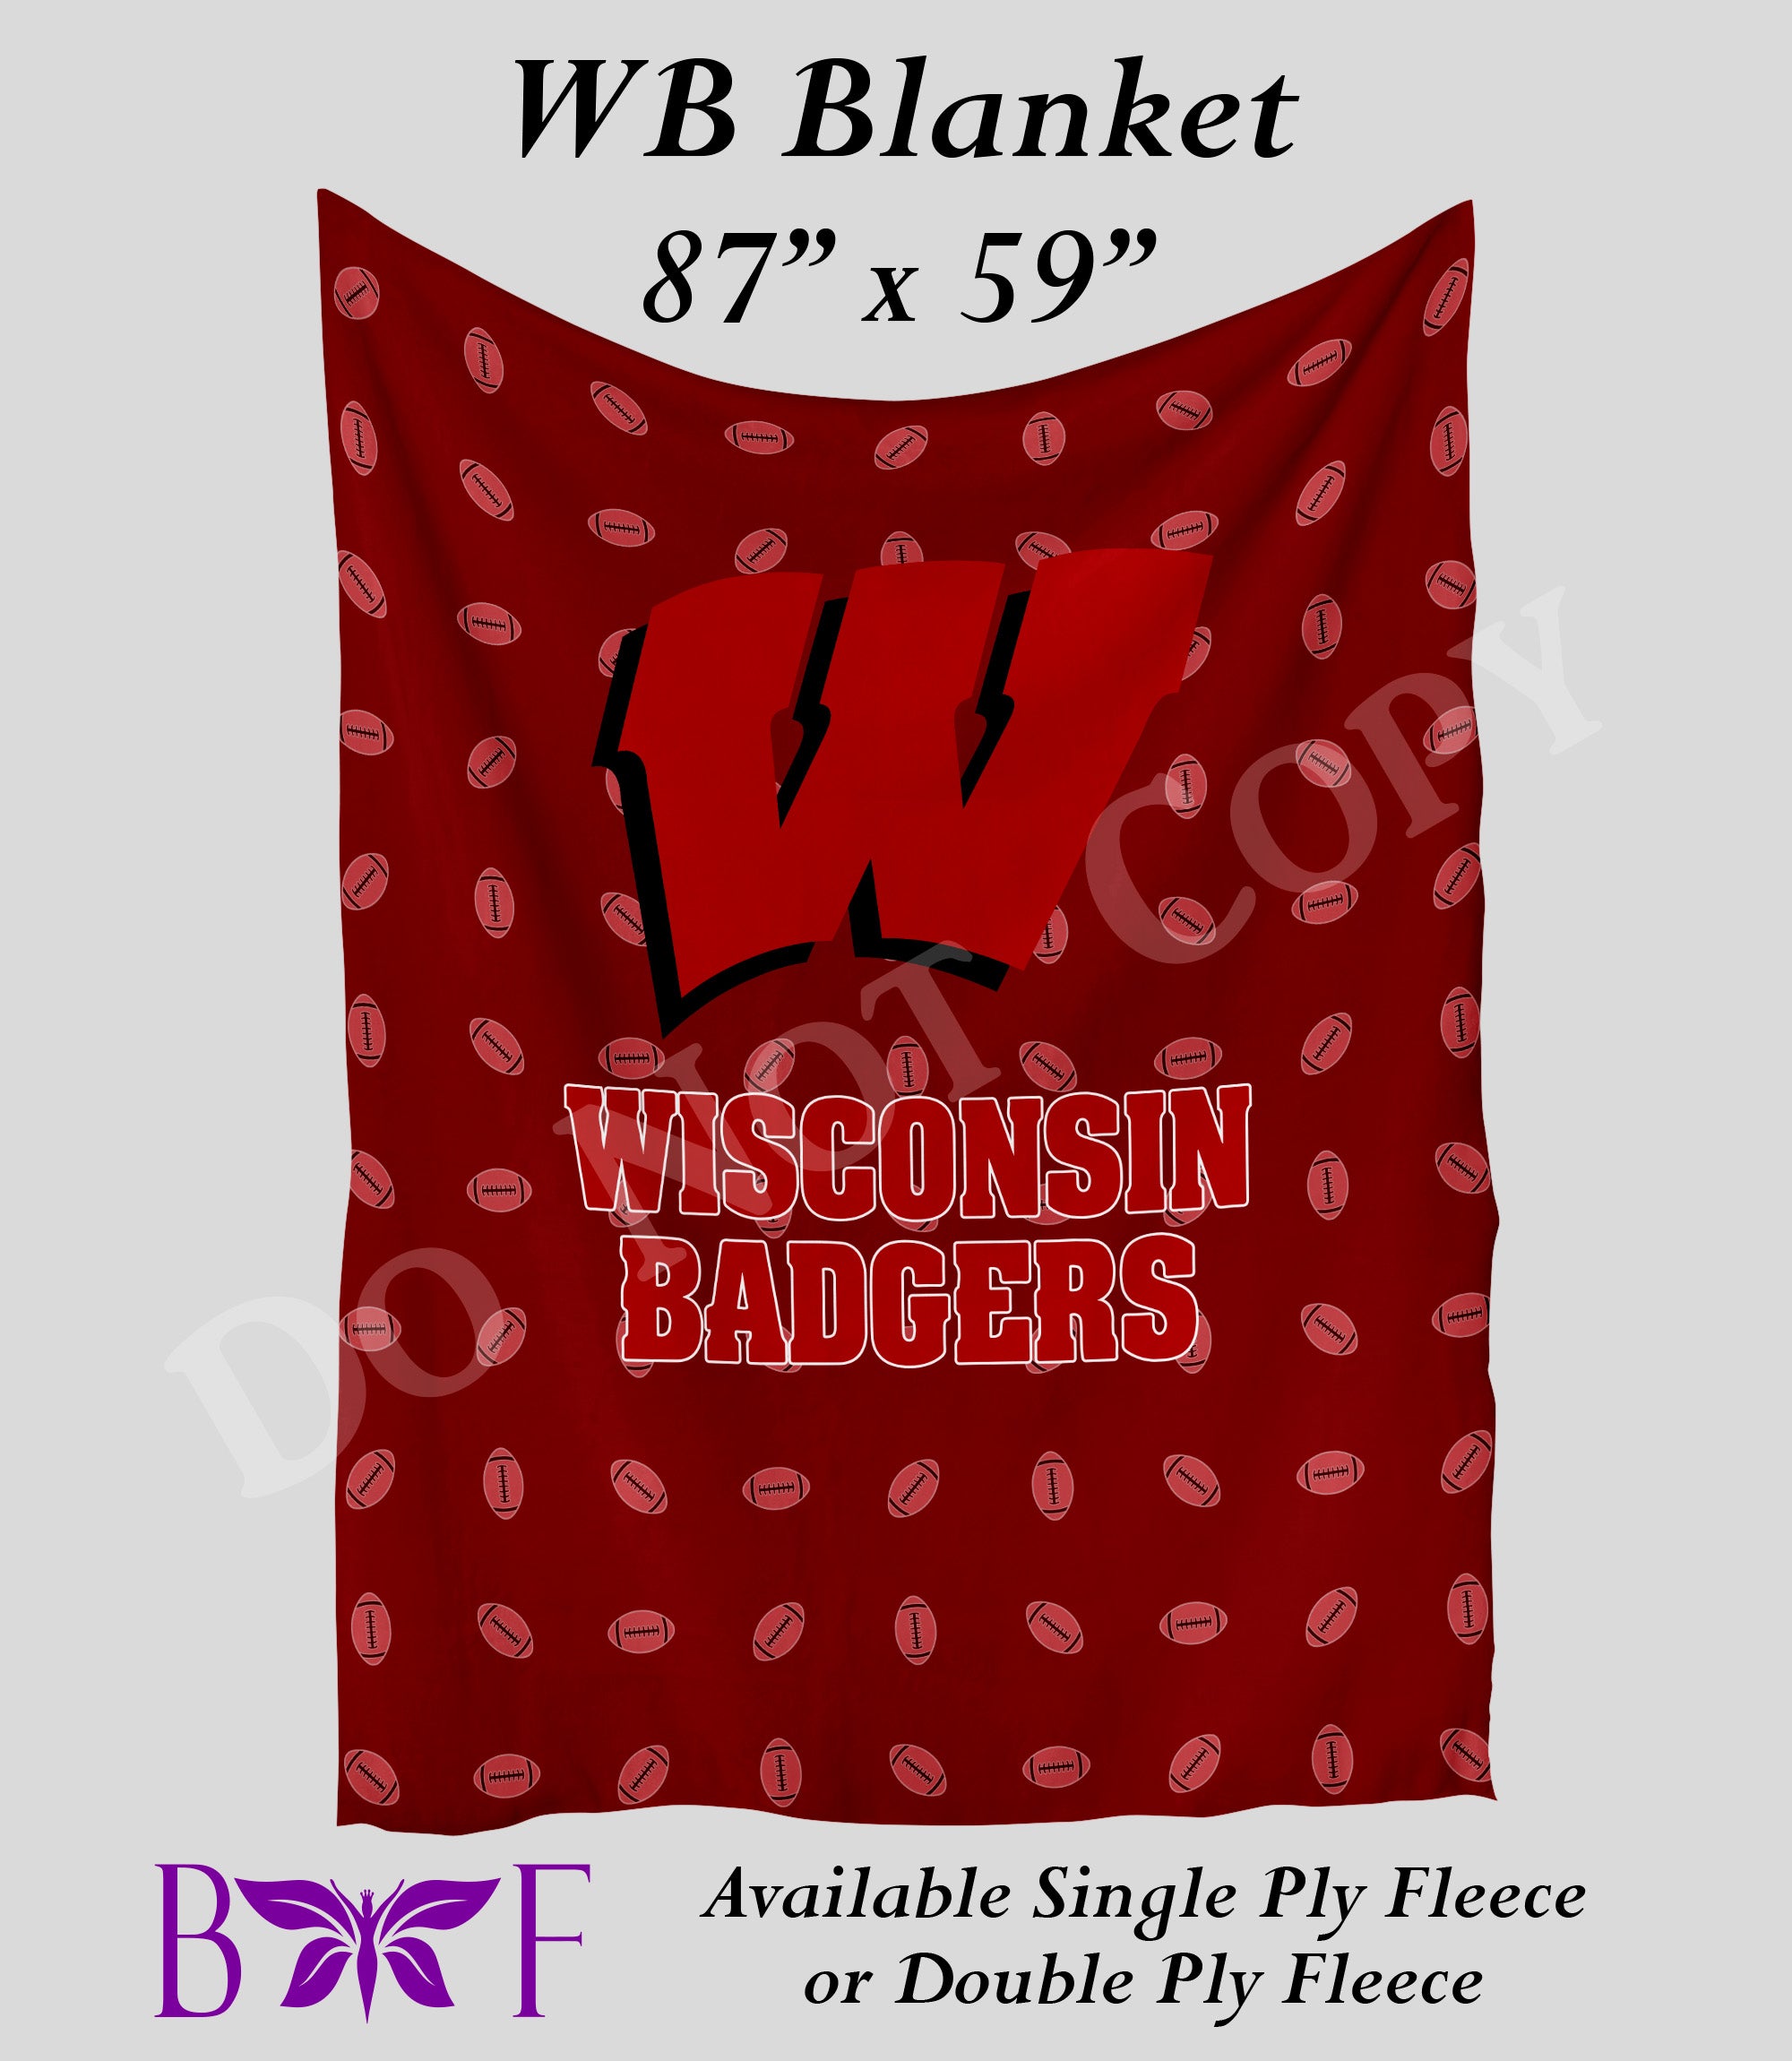 WB 59"x87" soft blanket also available with sherpa fleece